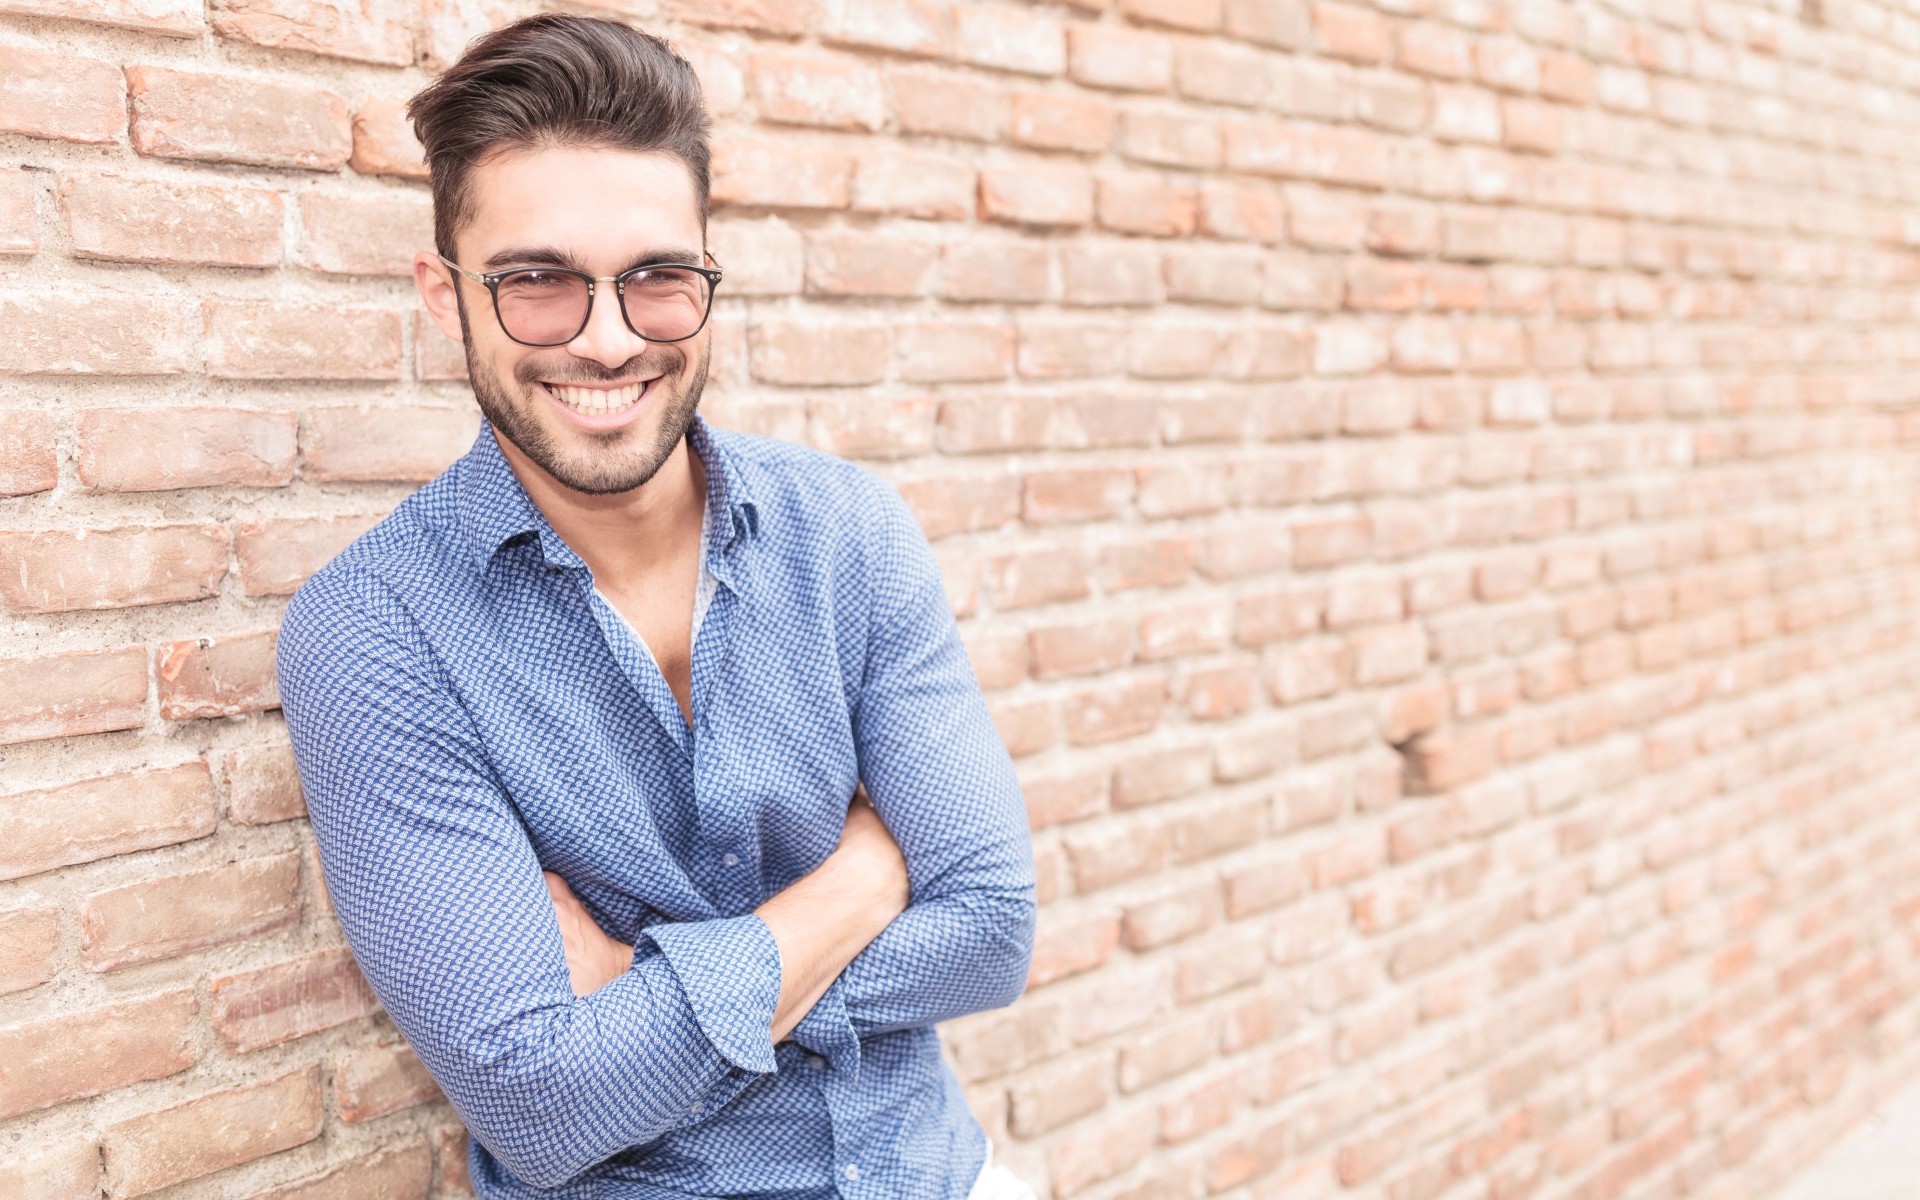 Smiling man with glasses standing against the wall